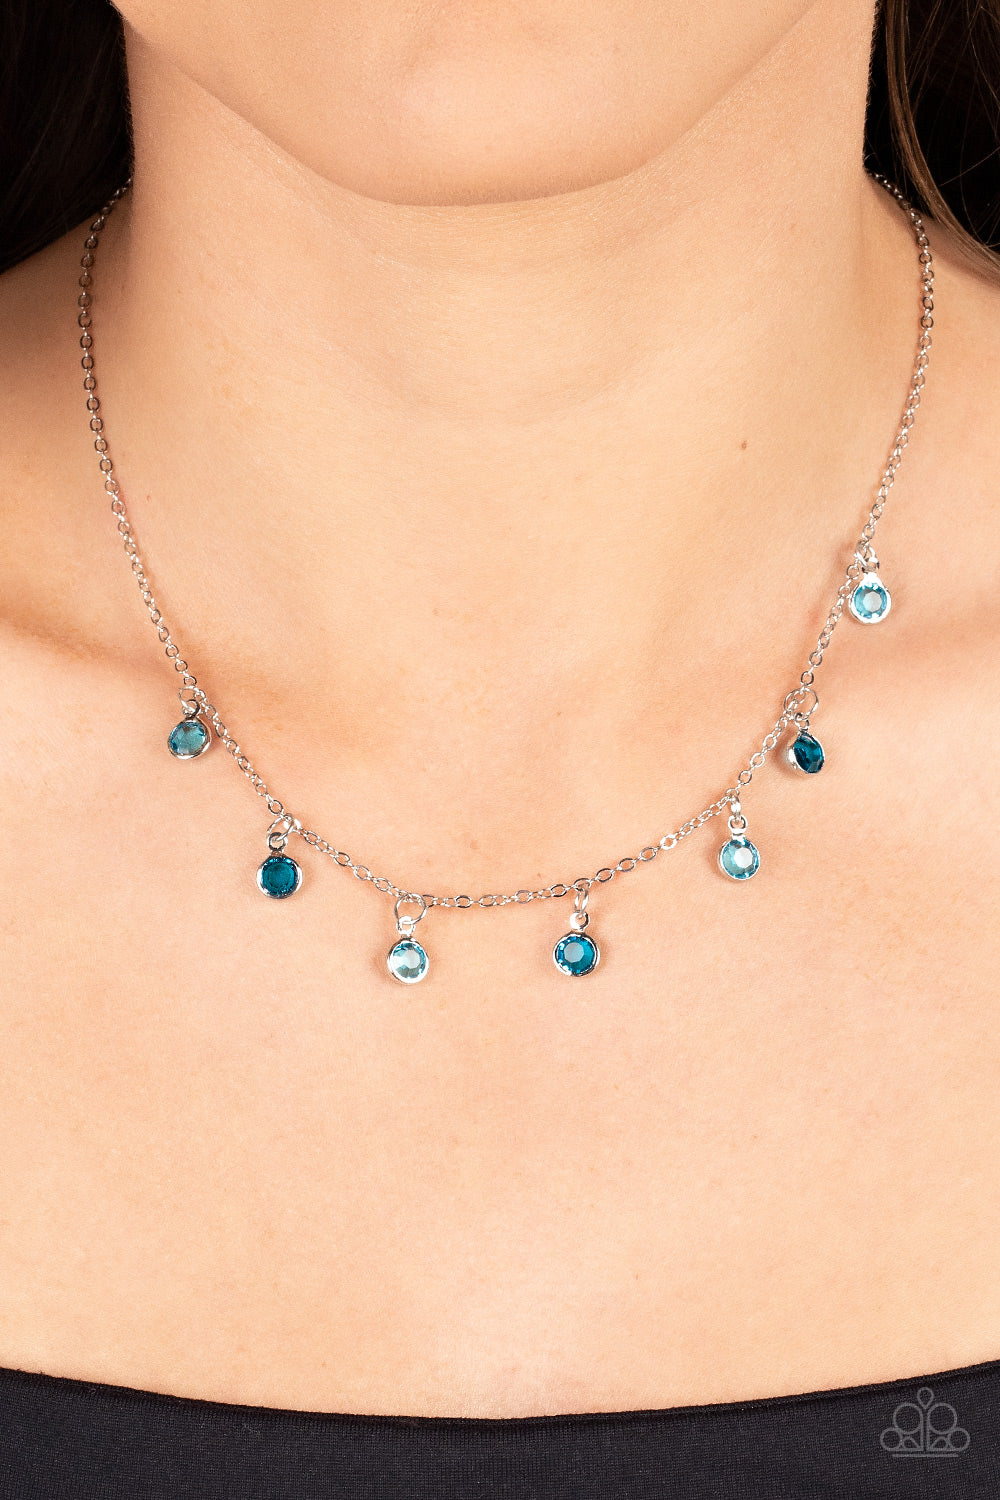 Paparazzi Necklaces - Carefree Charmer - Blue